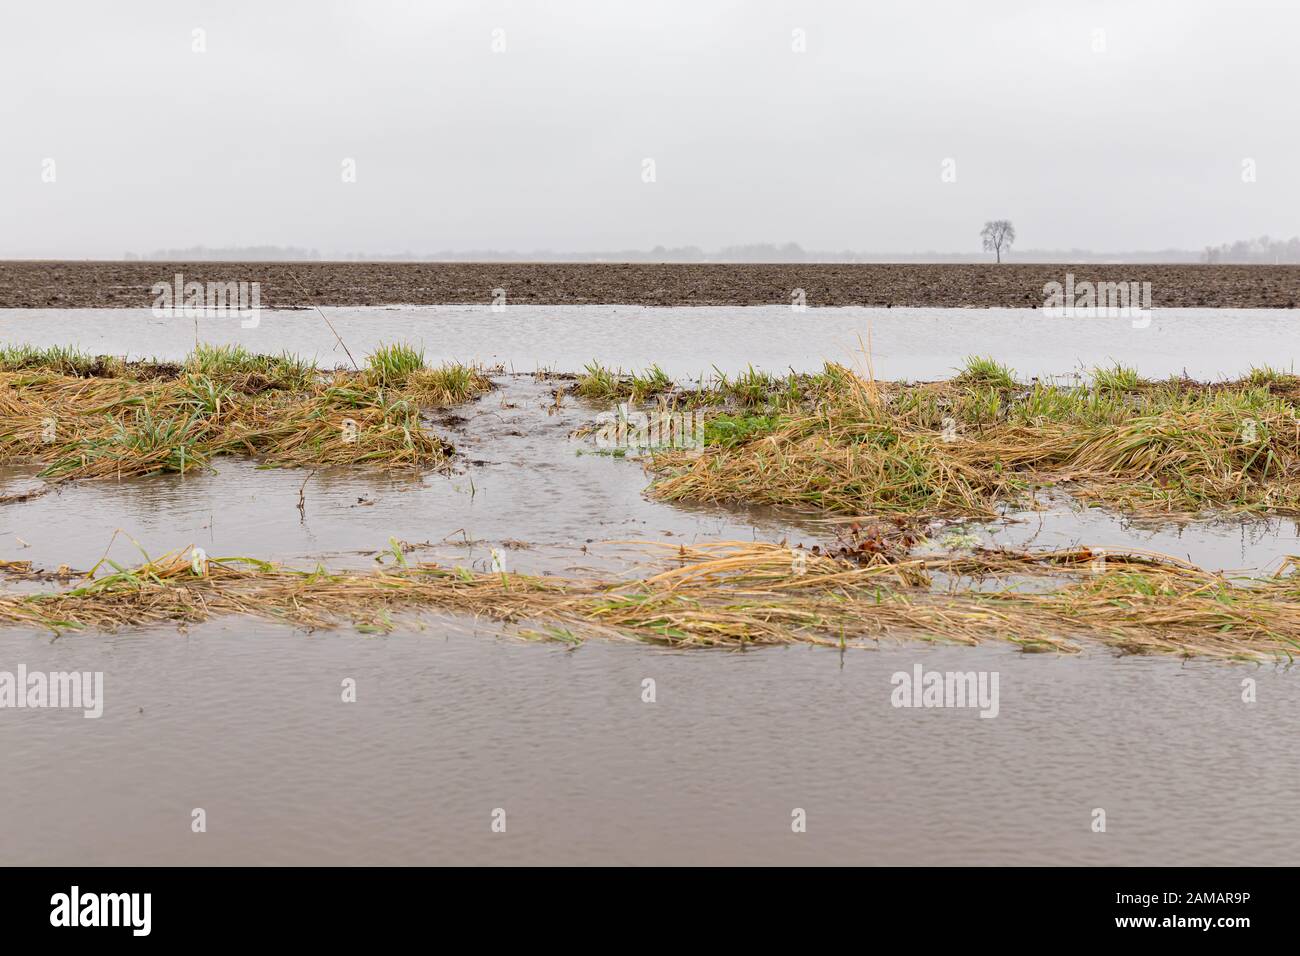 January storms with heavy rain caused flash flooding in farm fields, overflowing ditches and soil erosion from flowing water runoff Stock Photo